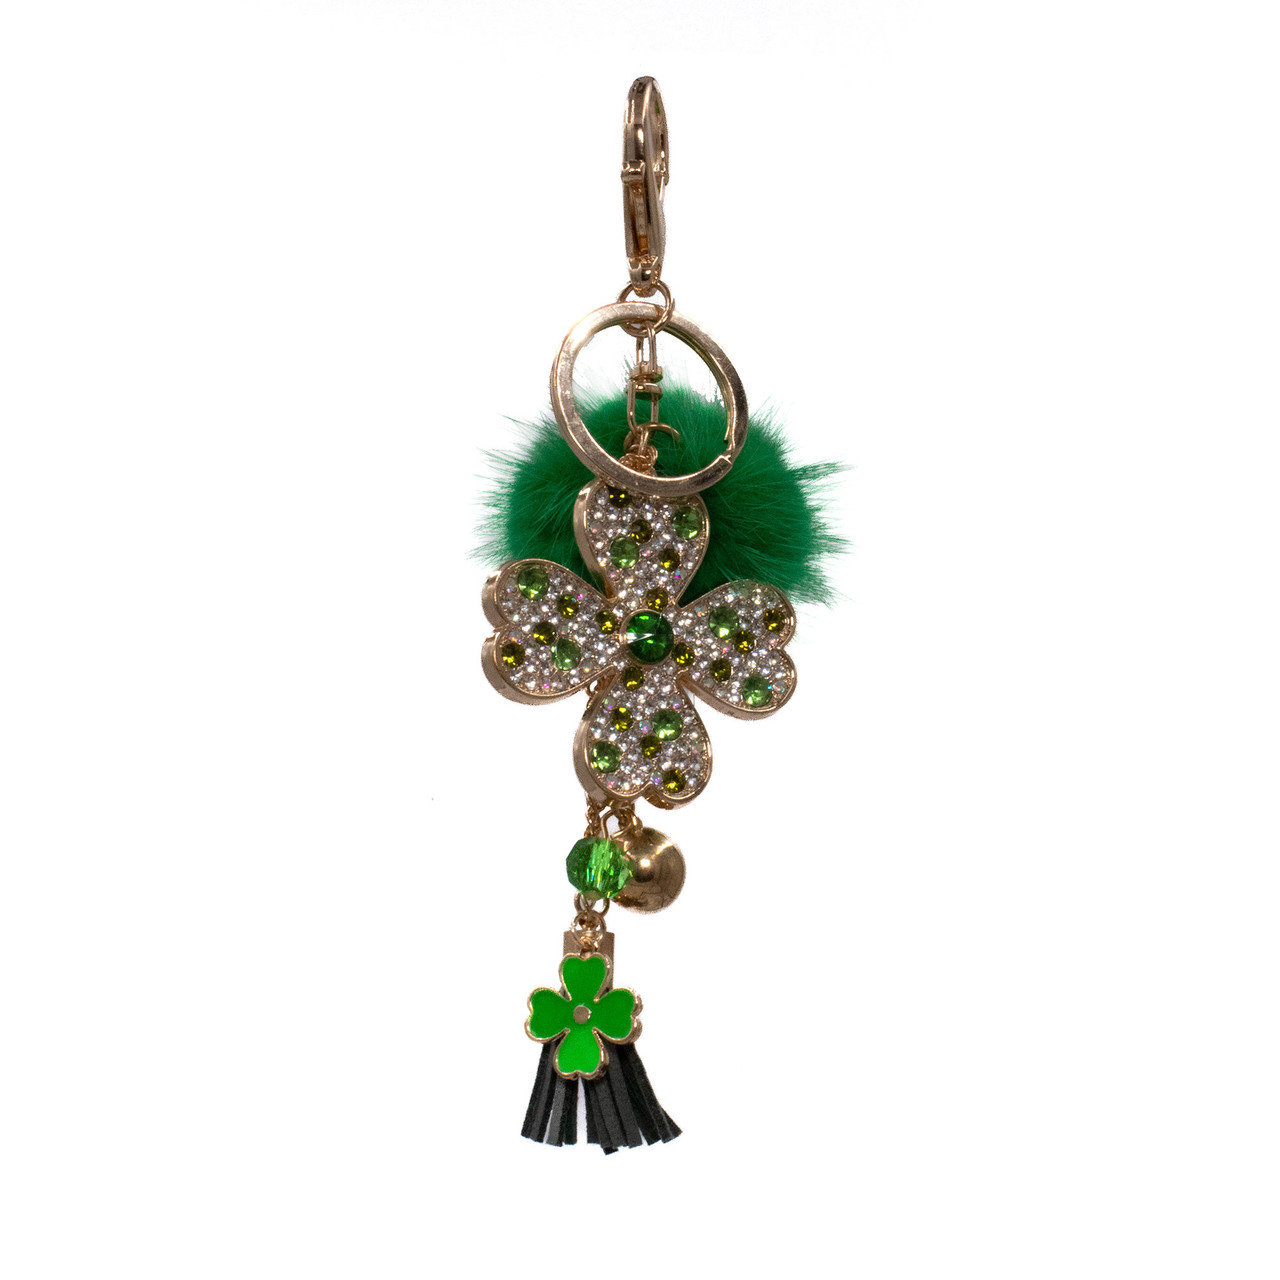 Bling Rose Keychain with Mink Fur Pom